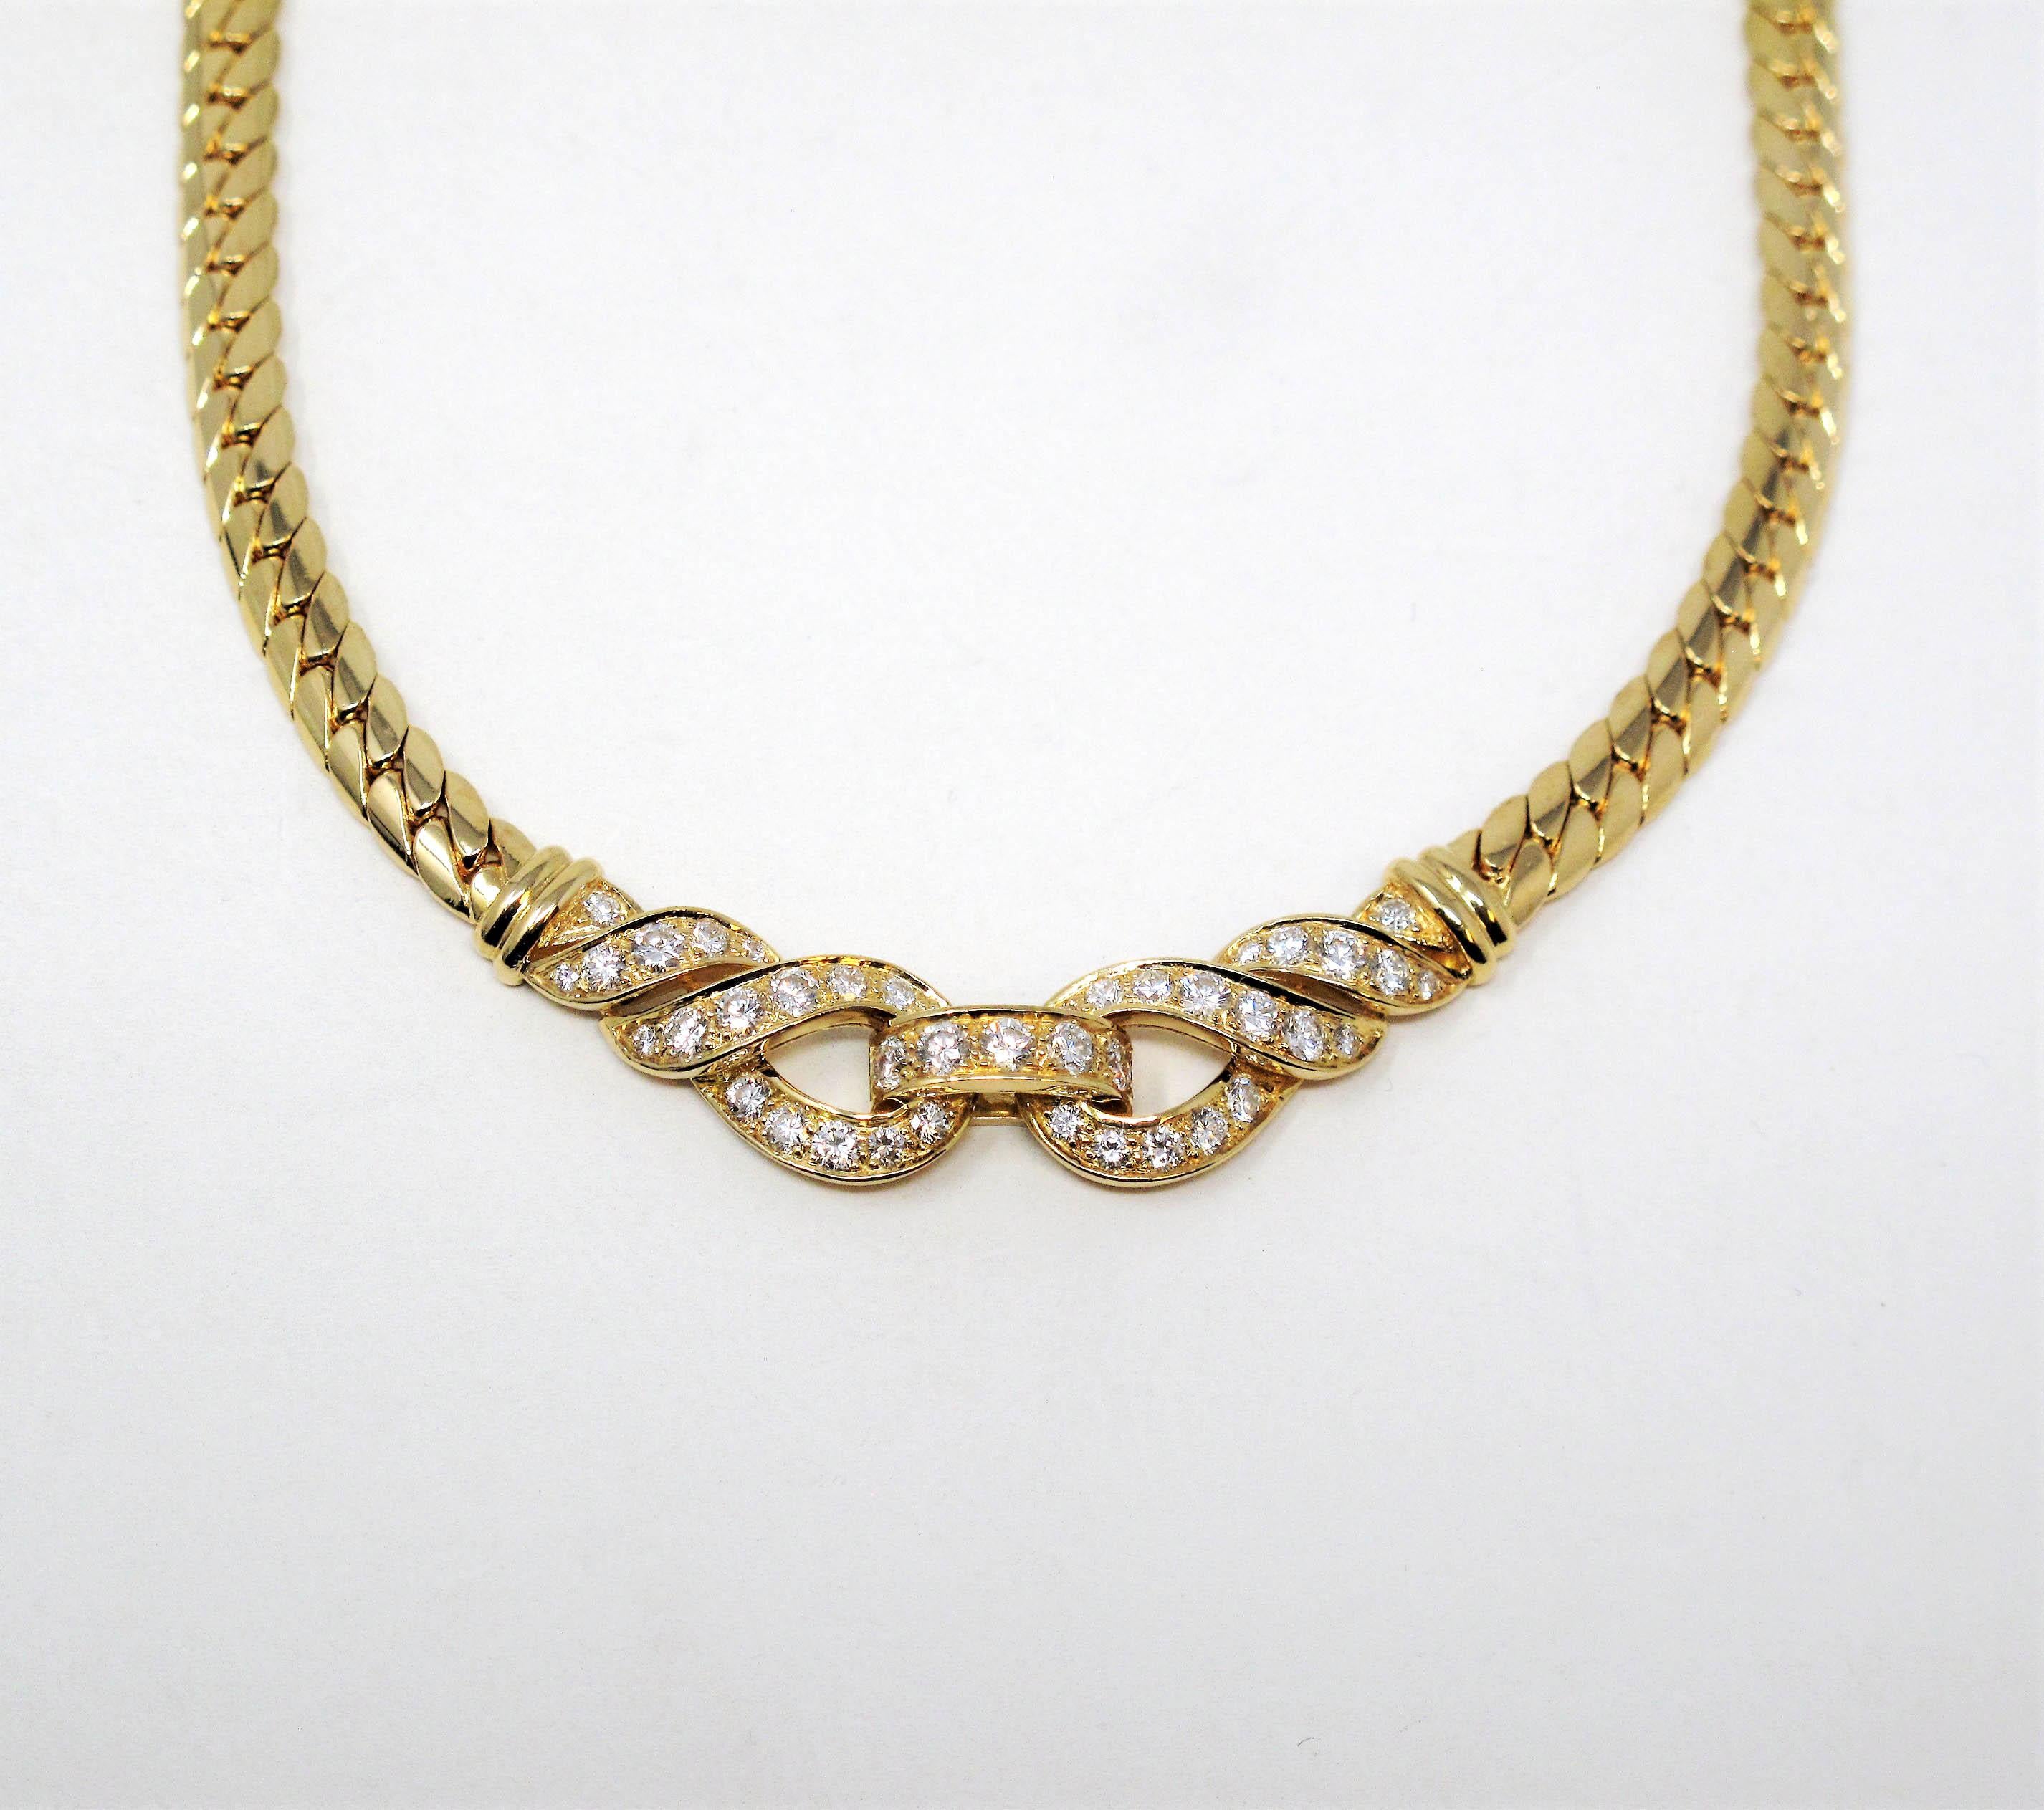 Cartier wows us once again with this gorgeous pave diamond collar necklace. Stunningly simple in design, the curved lines and glittering diamonds make the piece absolutely shine!

This beautiful designer necklace features a solid 18 karat yellow